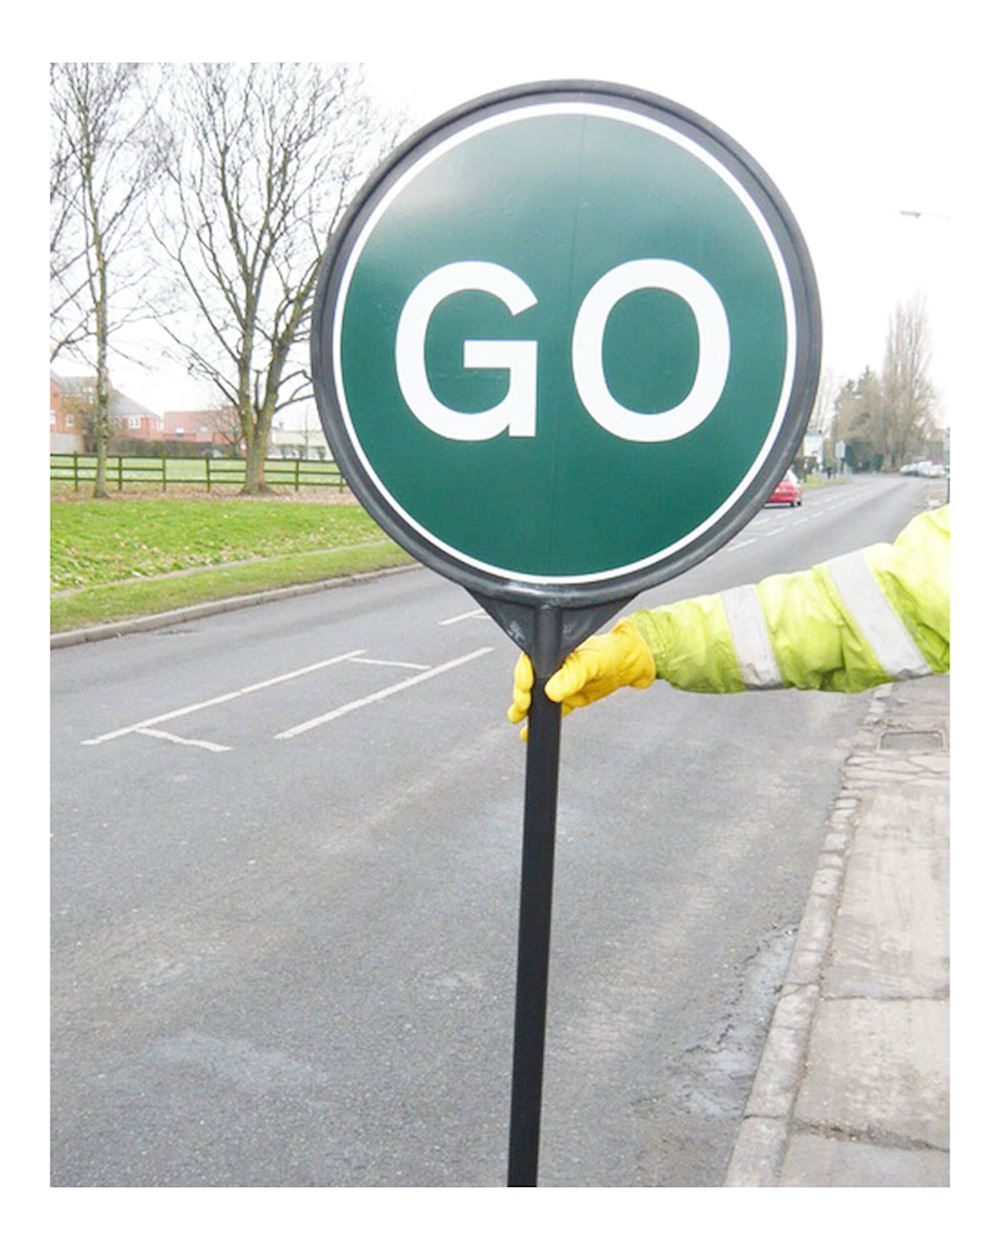 STOP And GO Traffic Sign